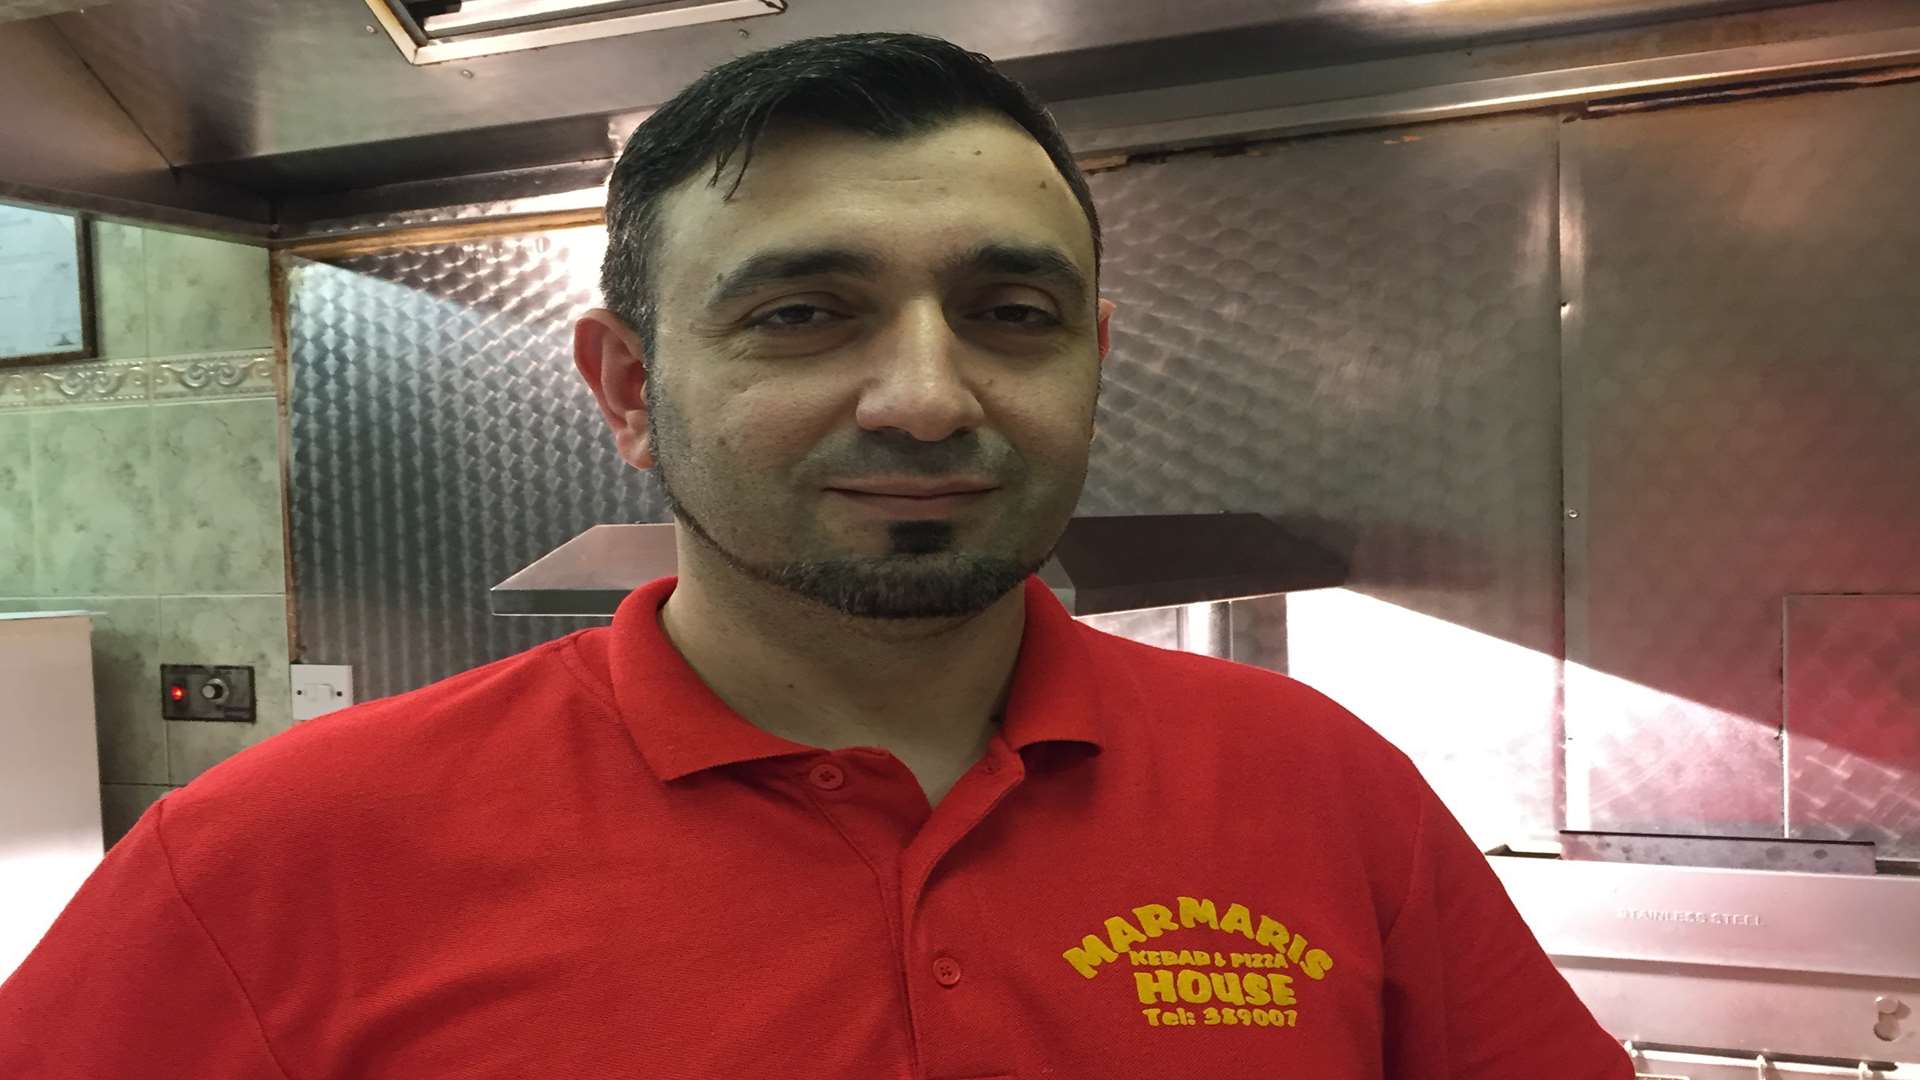 Tuncay Yildirim says he is pleased to be able to serve his customers again